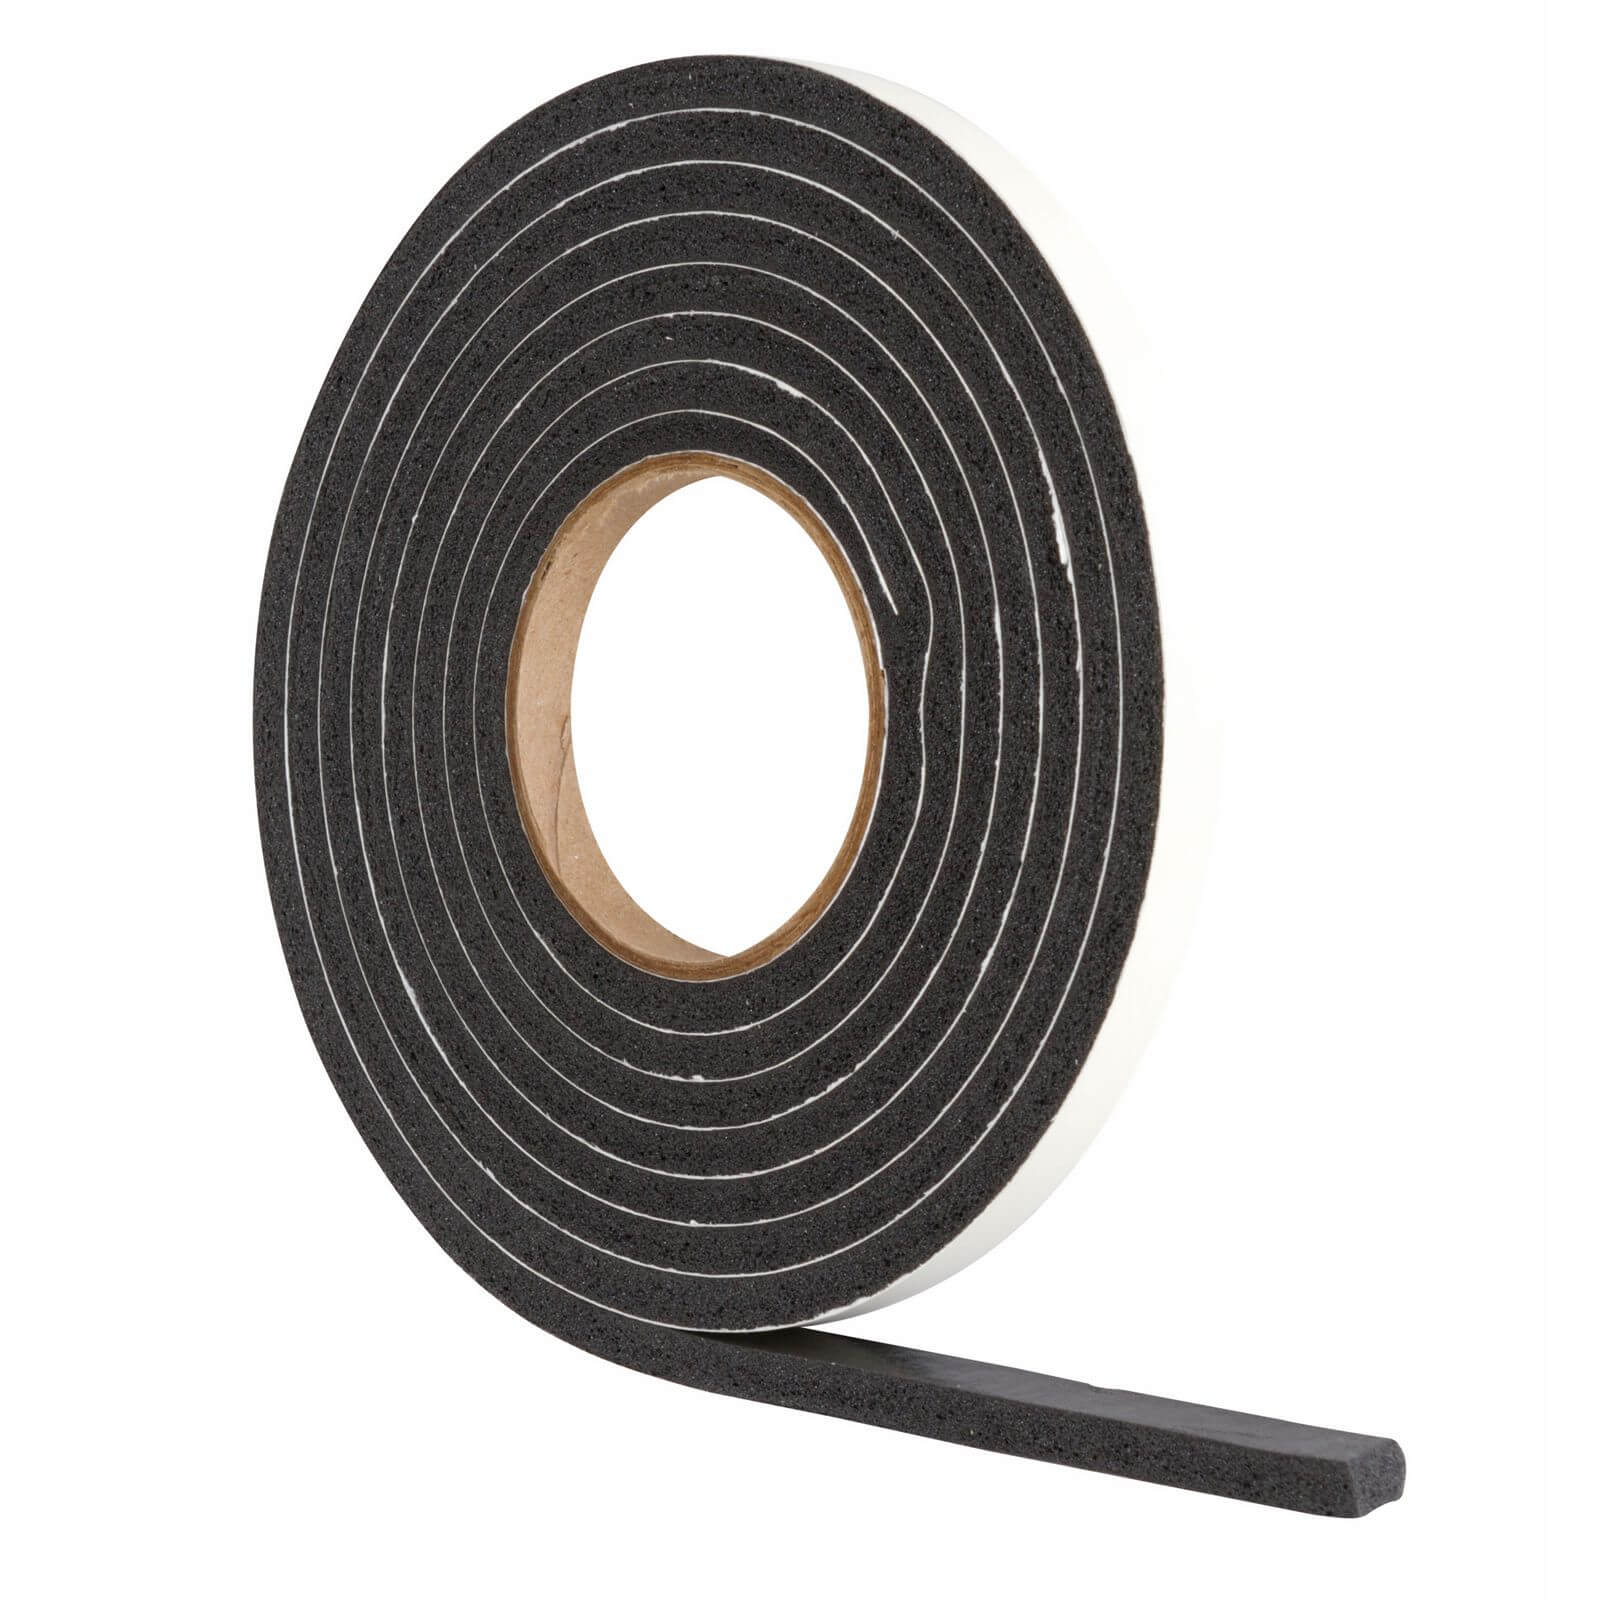 Stormguard Extra Thick Foam Draught Excluder Seal 3.5m - Black